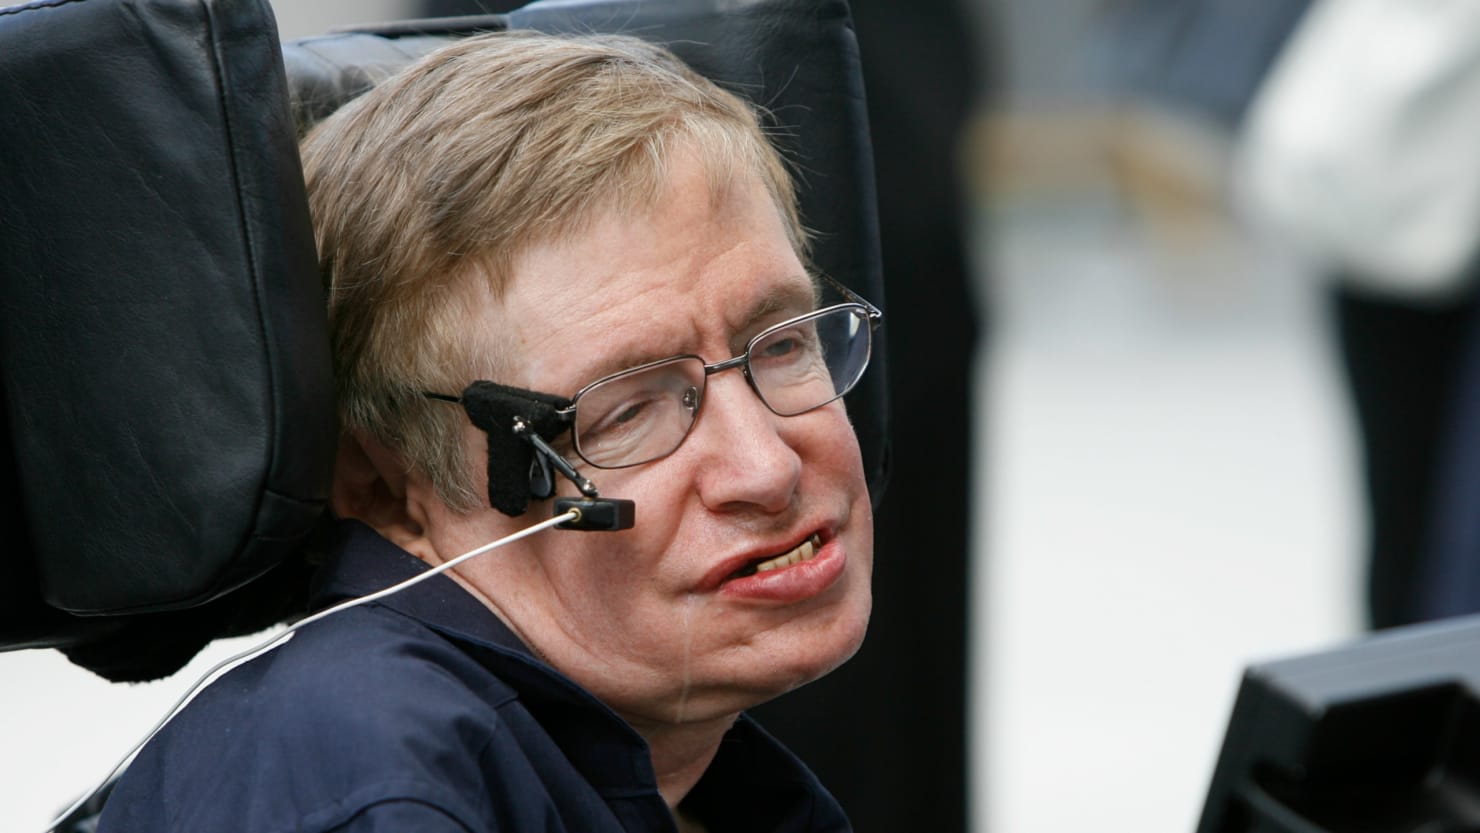 Stephen Hawking Was a Genius Who Could Laugh at Himself